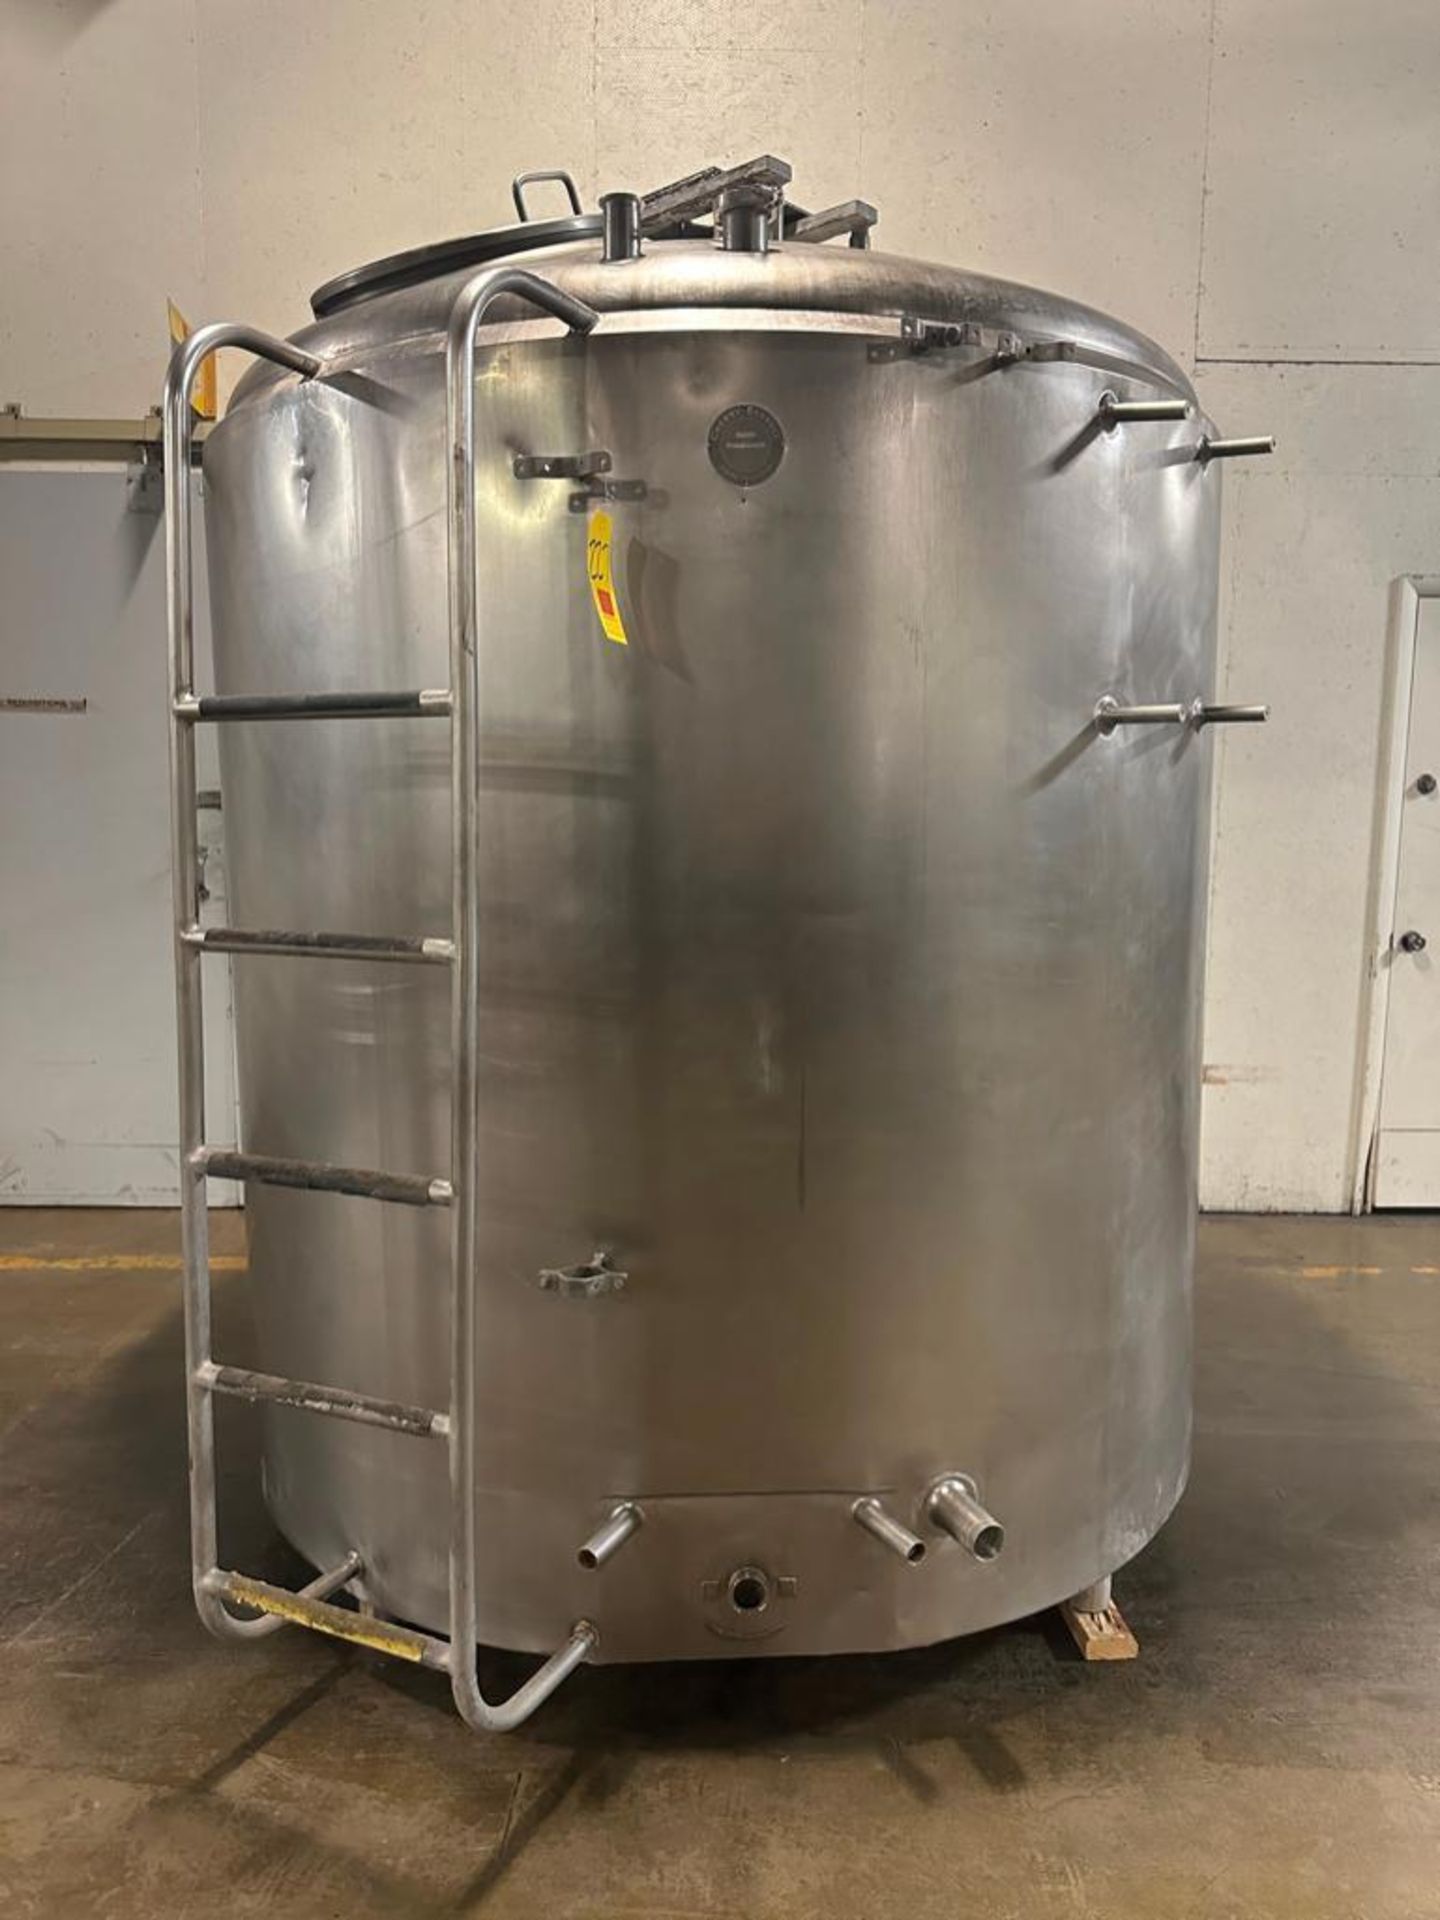 Cherry-Burrell 1,000 Gallon Jacketed S/S Processor, Model: EPD , S/N: 1000EPD63-1016 with Vertical